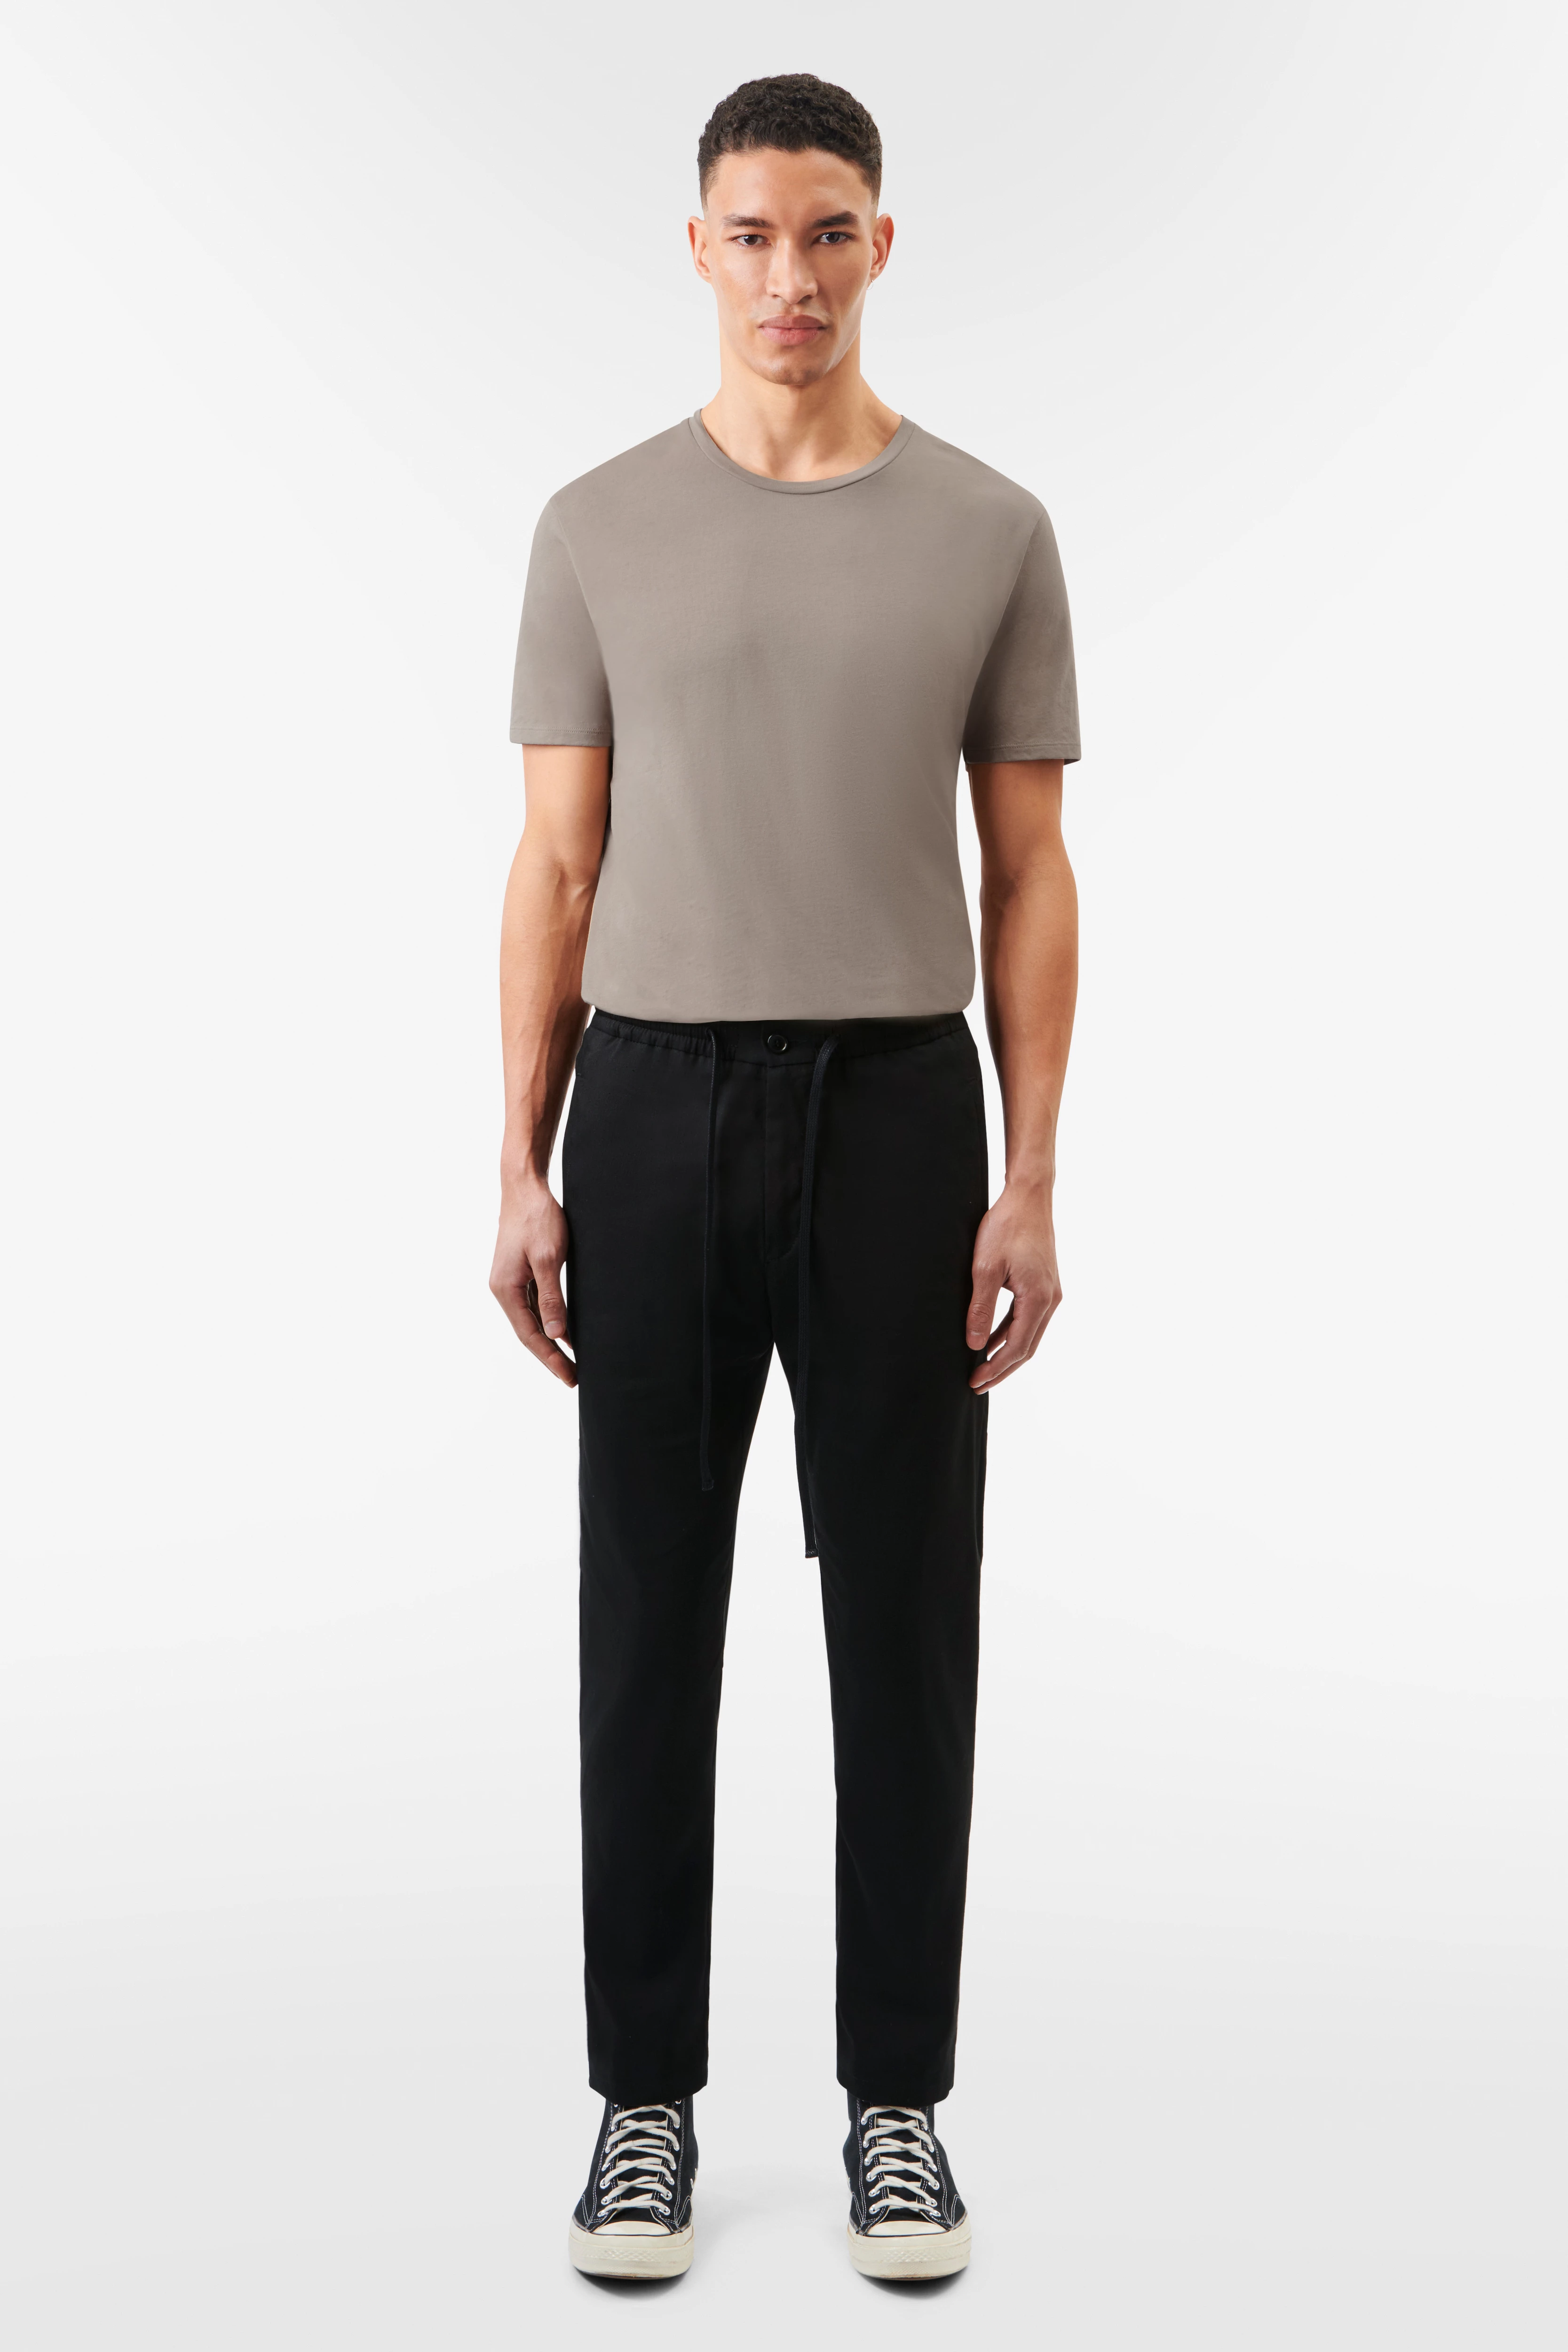 jogging trousers with drawstring in a summery linen blend JEGER online ...